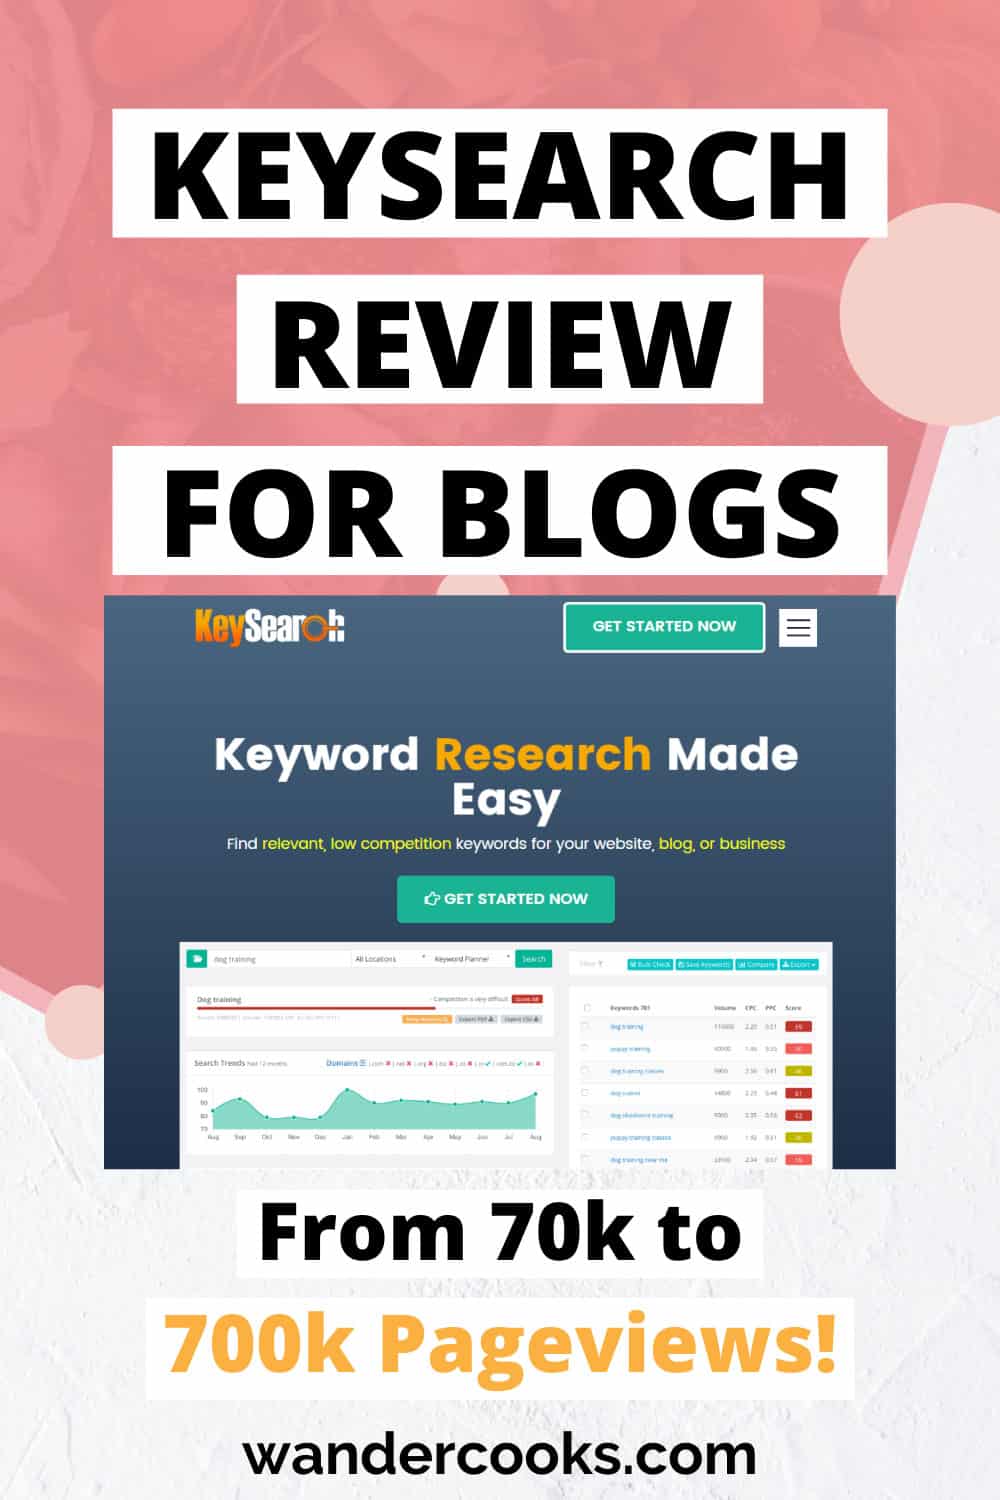 KeySearch for Blogs - A Keyword Research Tool Review